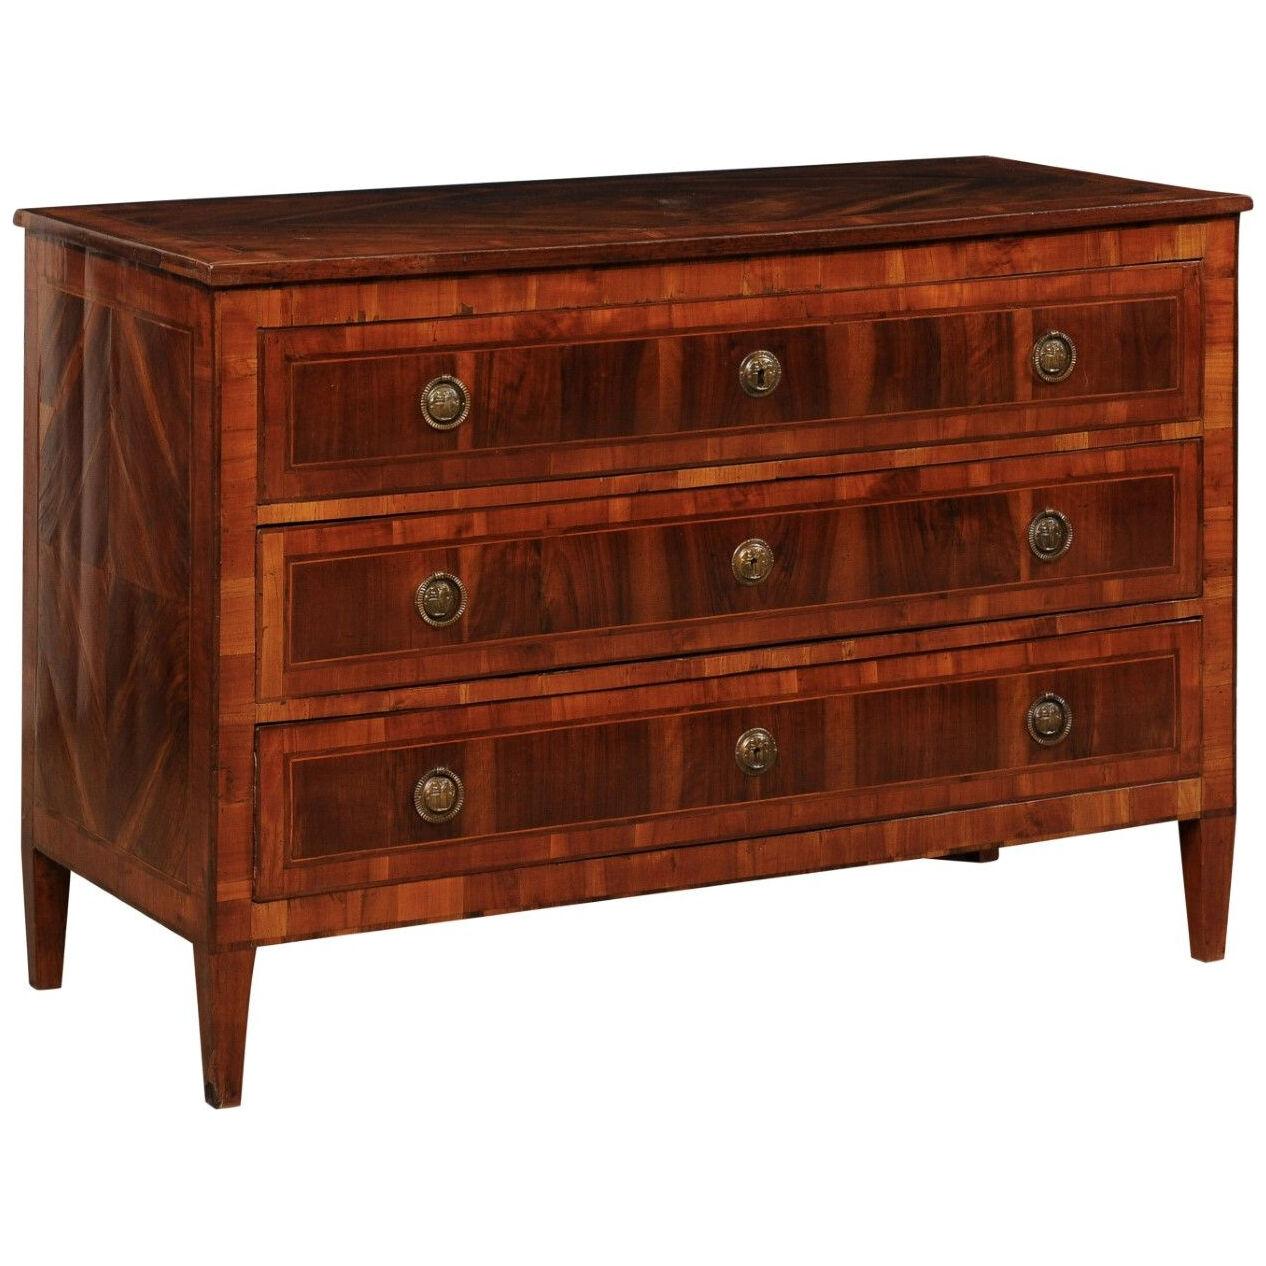 French Empire Period Bookmatch Veneer Chest